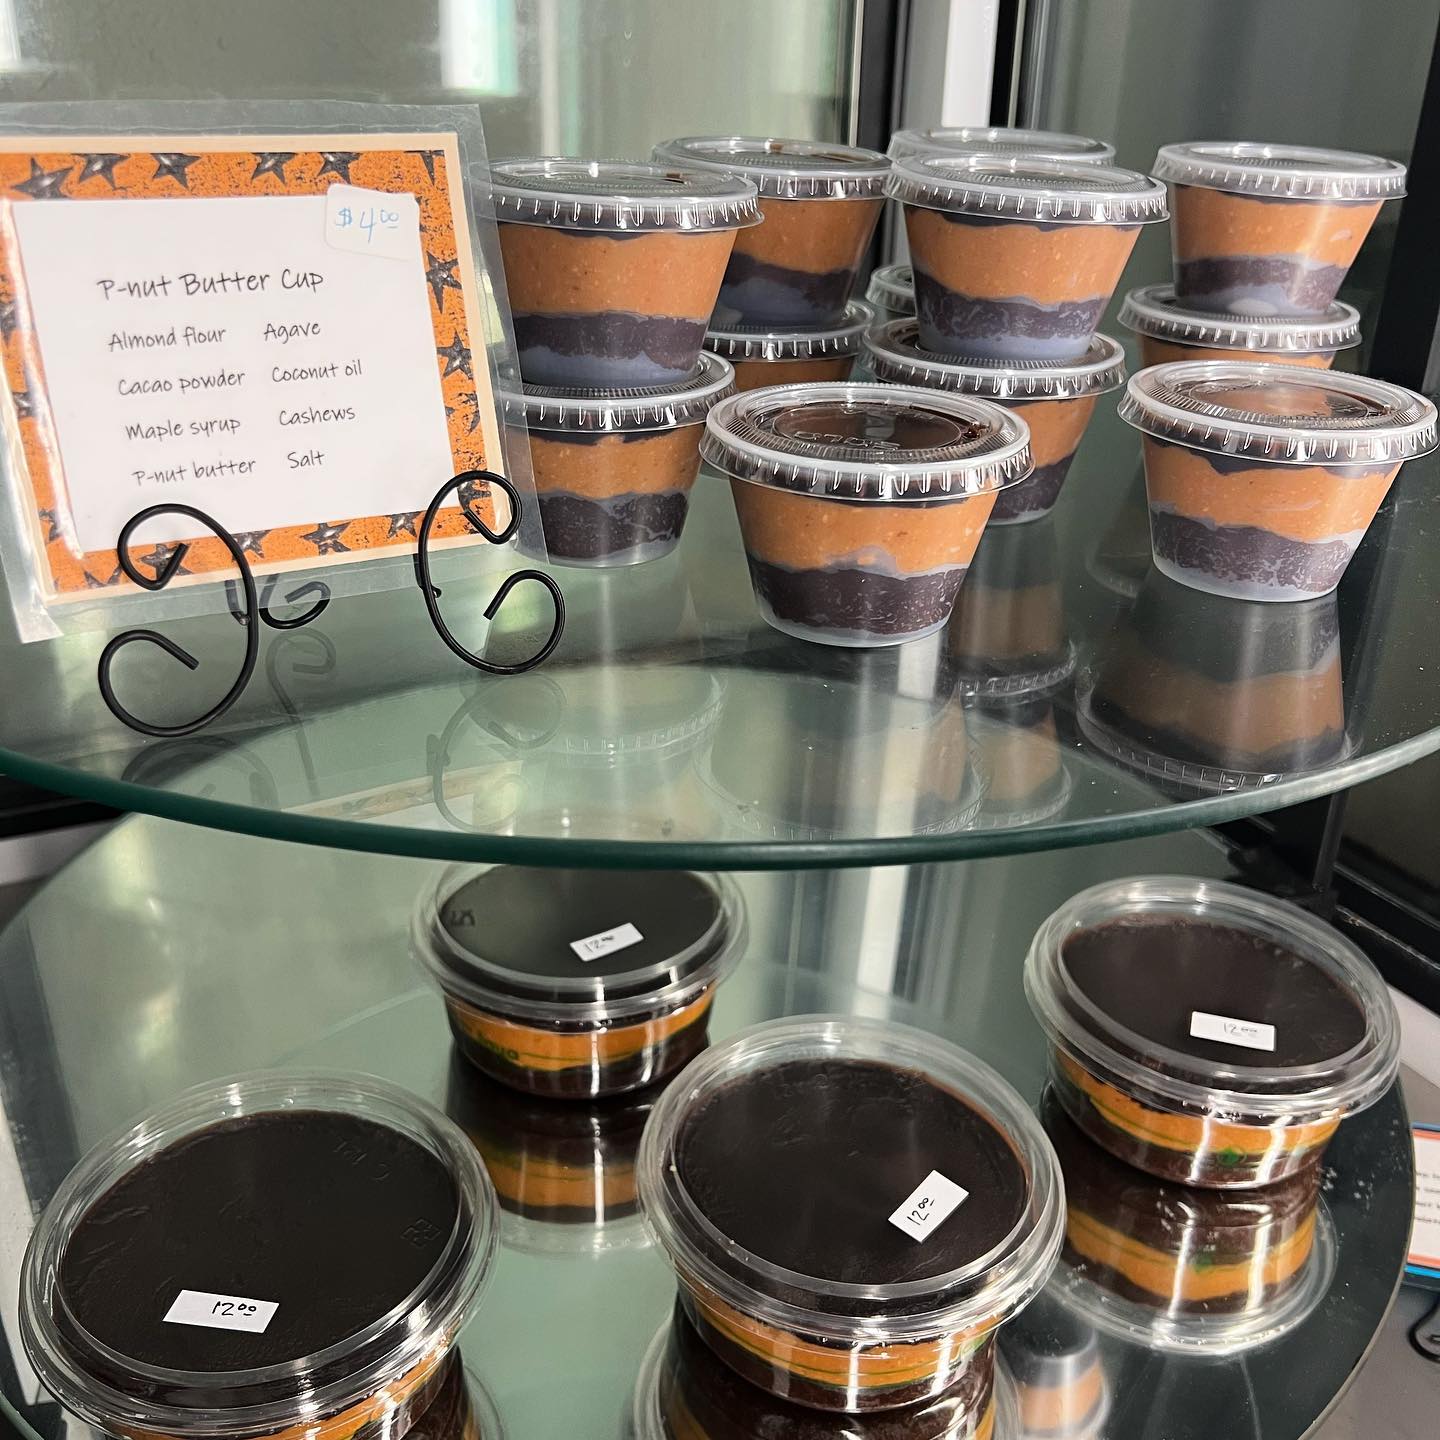 retail display of homemade peanut butter cups in small containers with lids